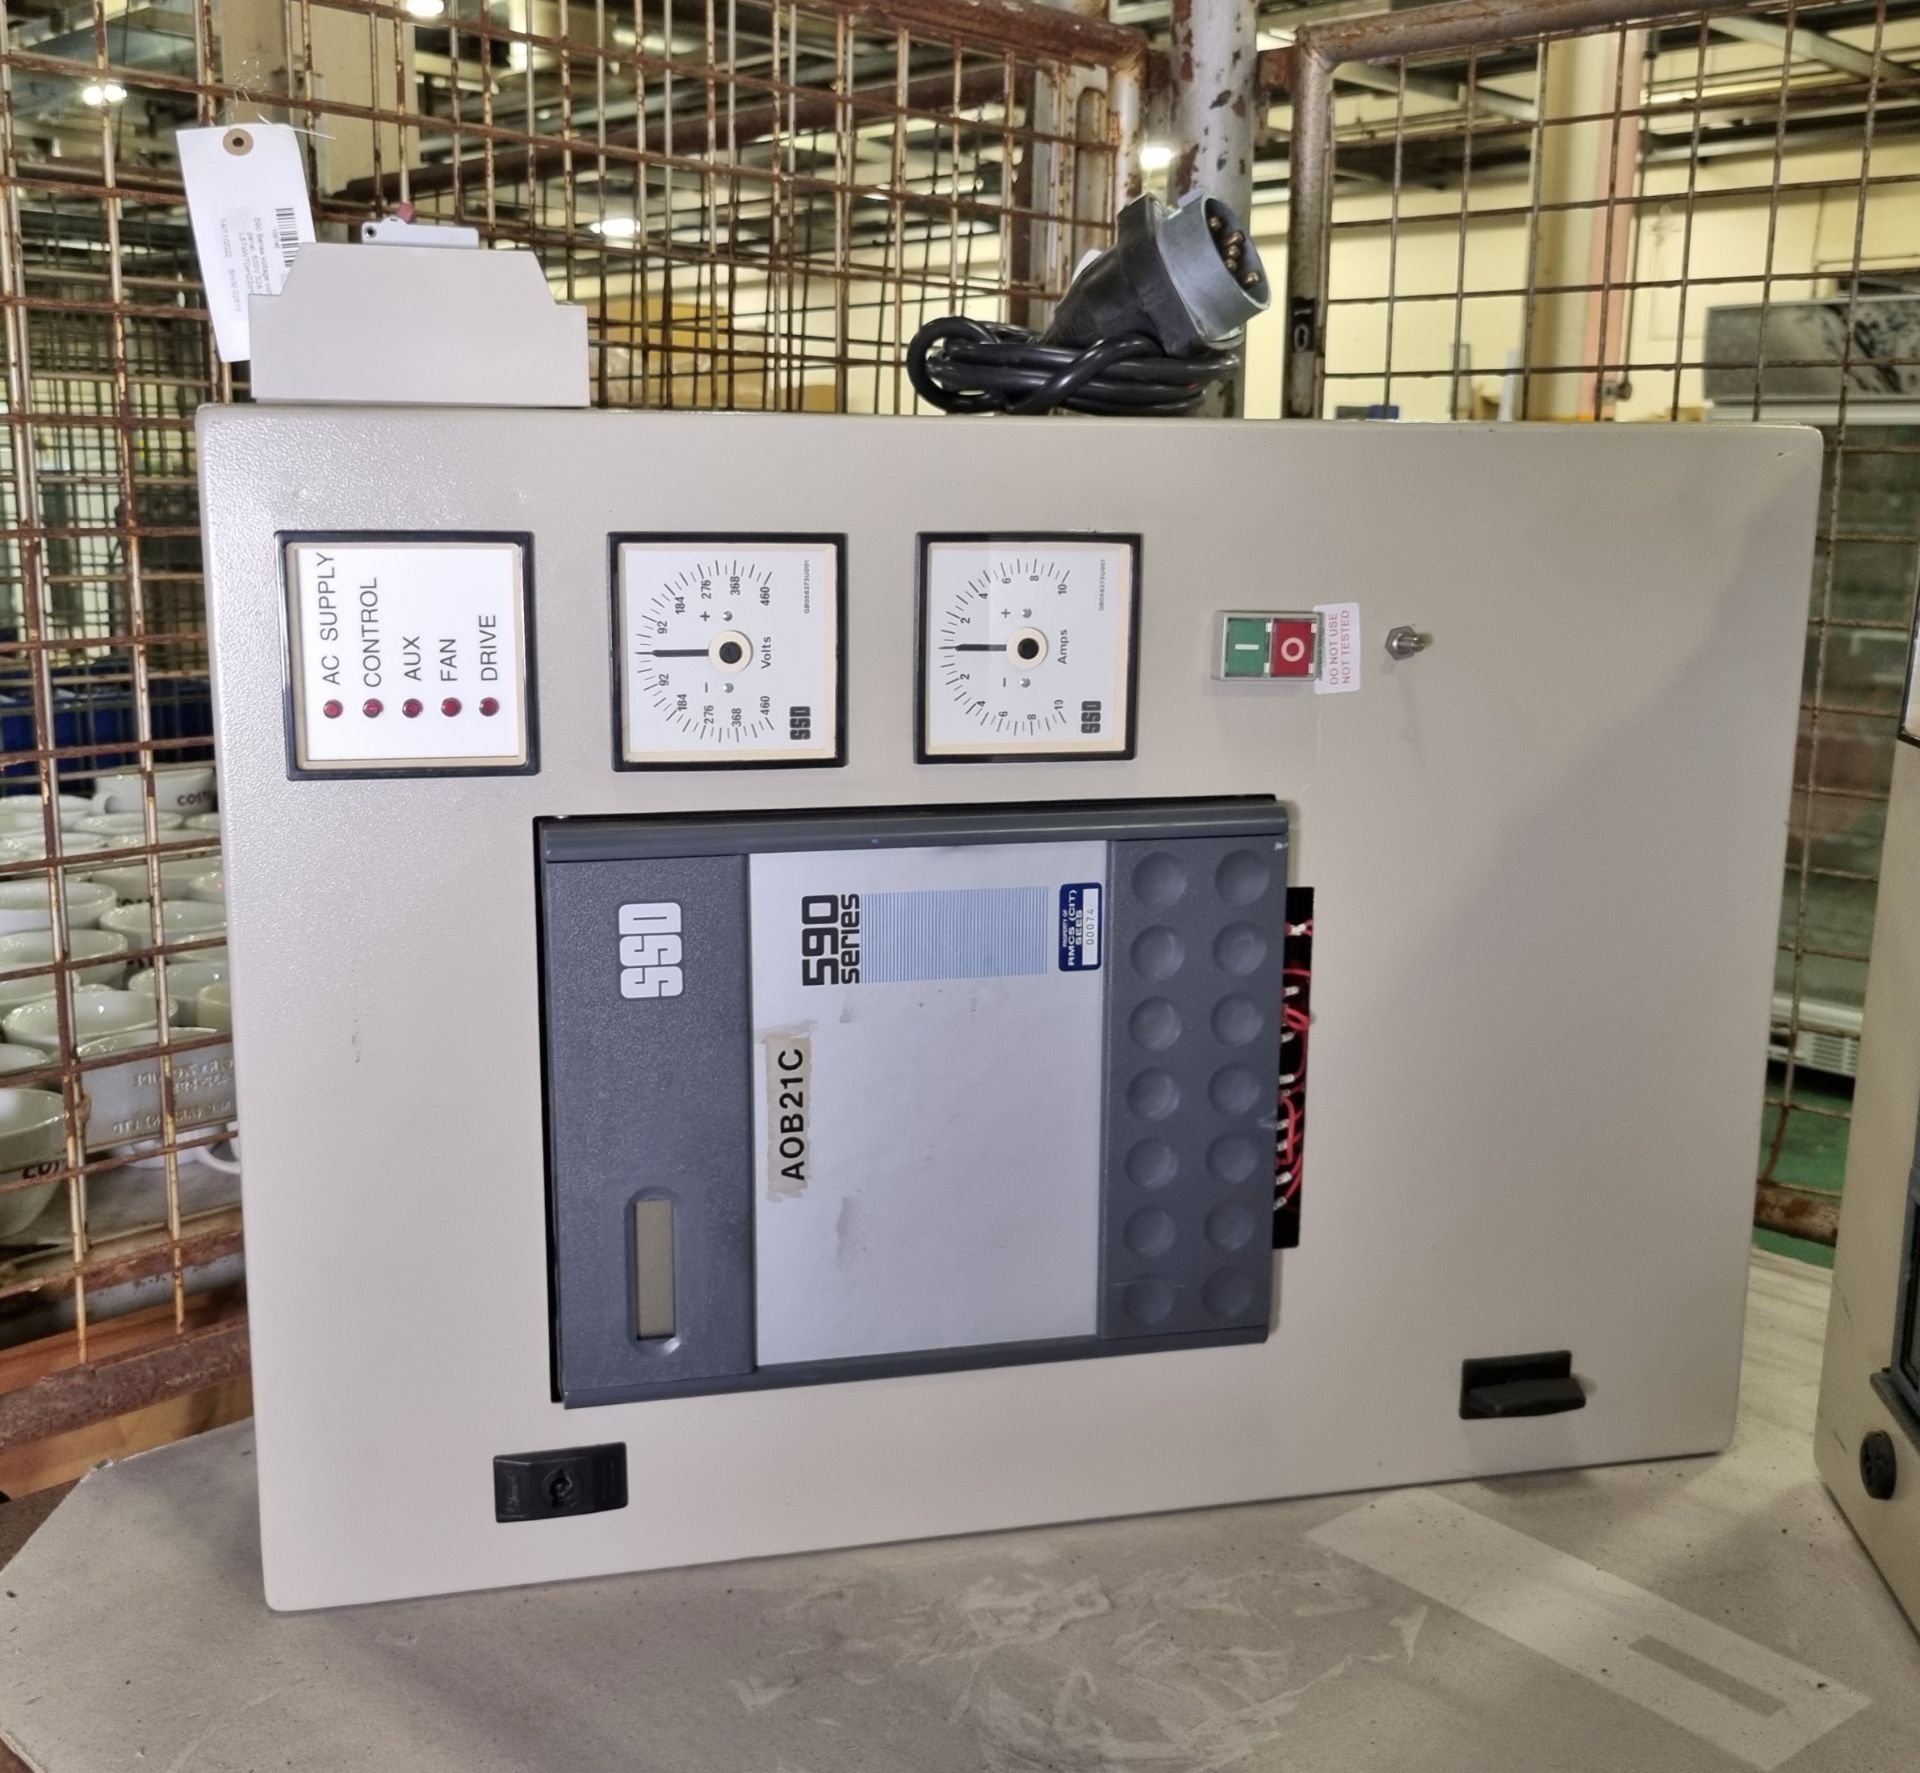 2x 590 Series voltage control panels - 500V 32A - L57xW70xH22cm - Image 3 of 8